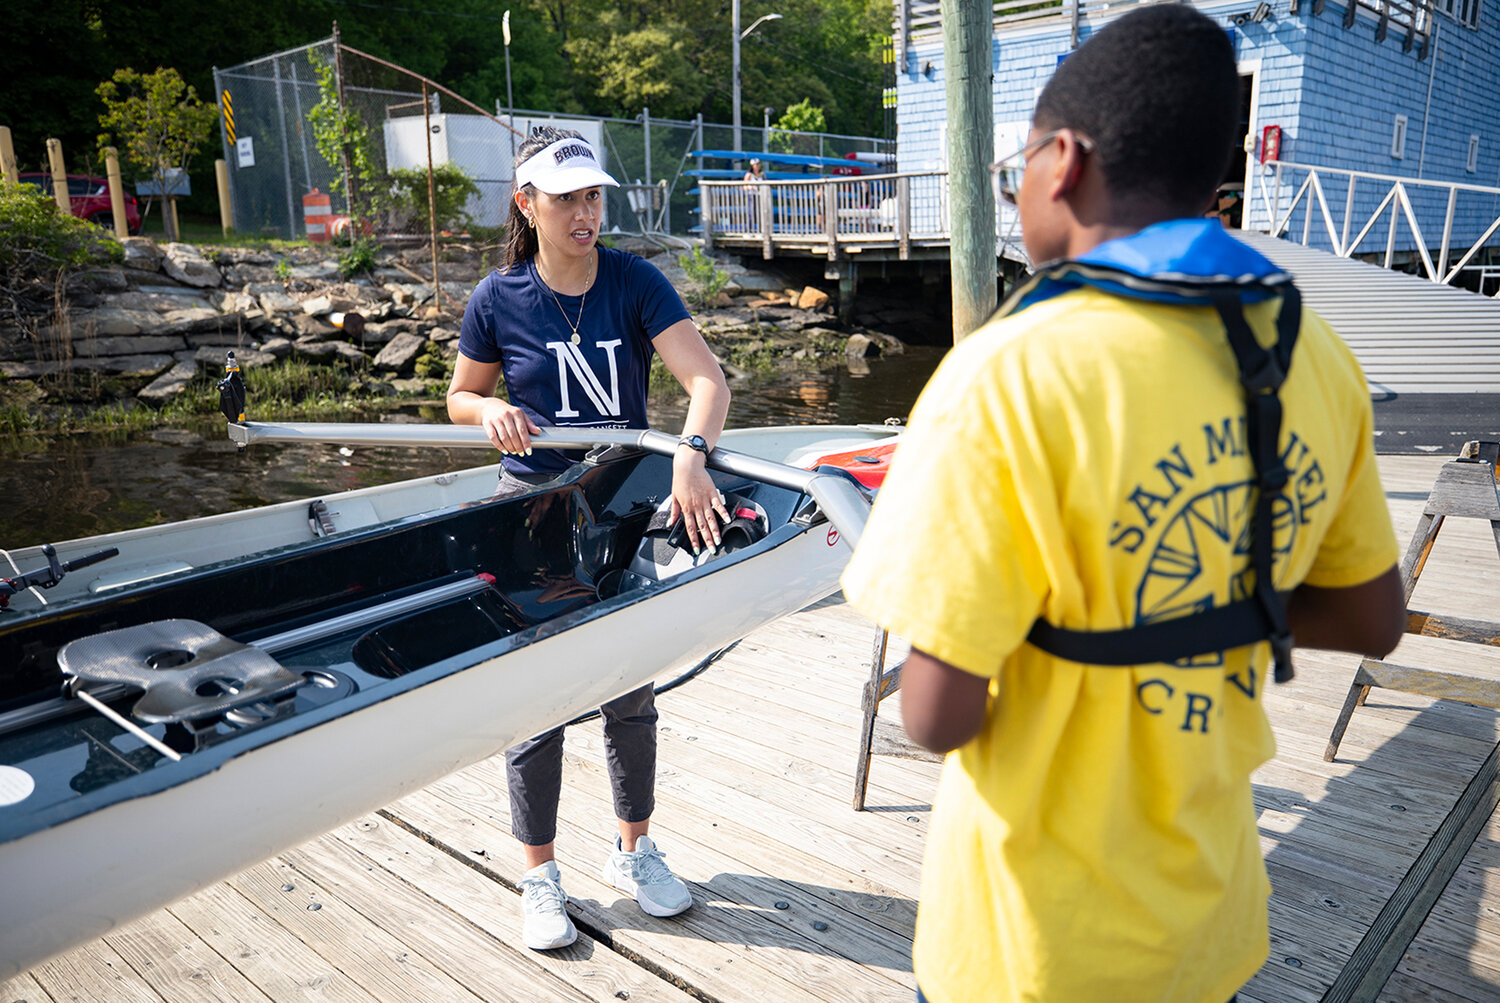 Emmanuel Gourdet, a seventh-grader at the San Miguel School, prepares to row on the Seekonk River